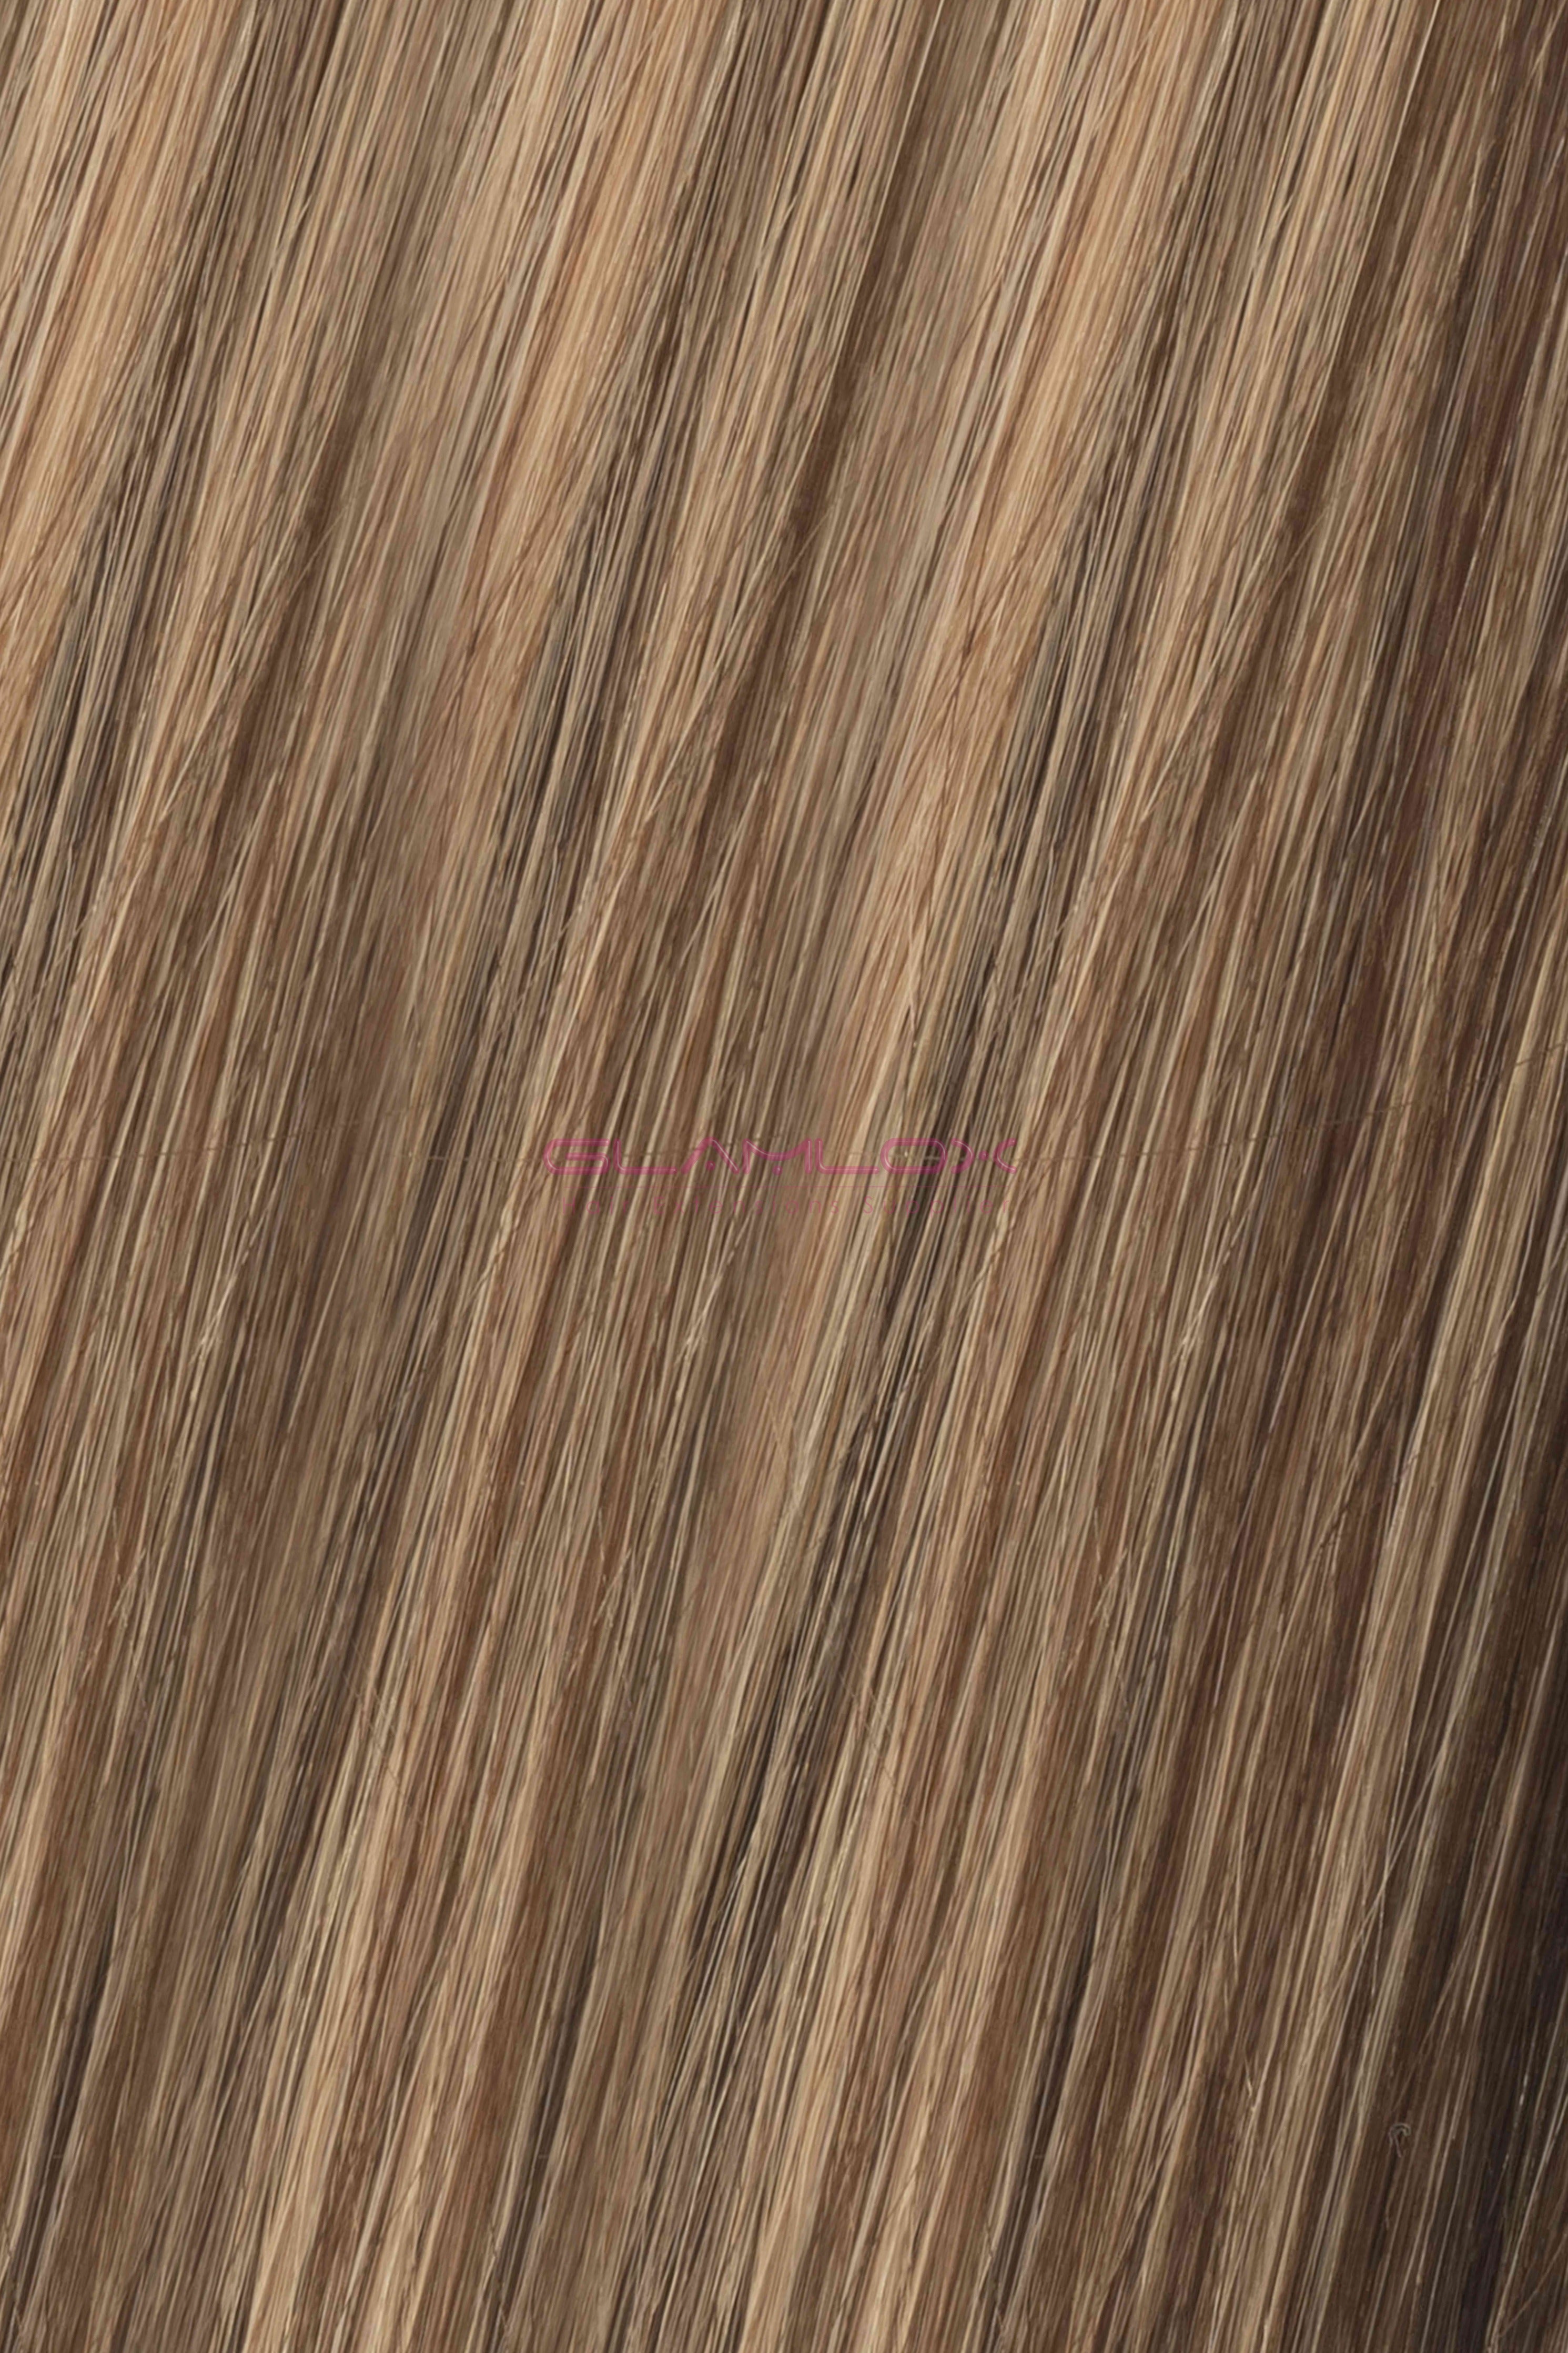 24"-25" Nano Ring Hair Extensions - Russian Mongolian Double Drawn Remy Human Hair - 100 Strands